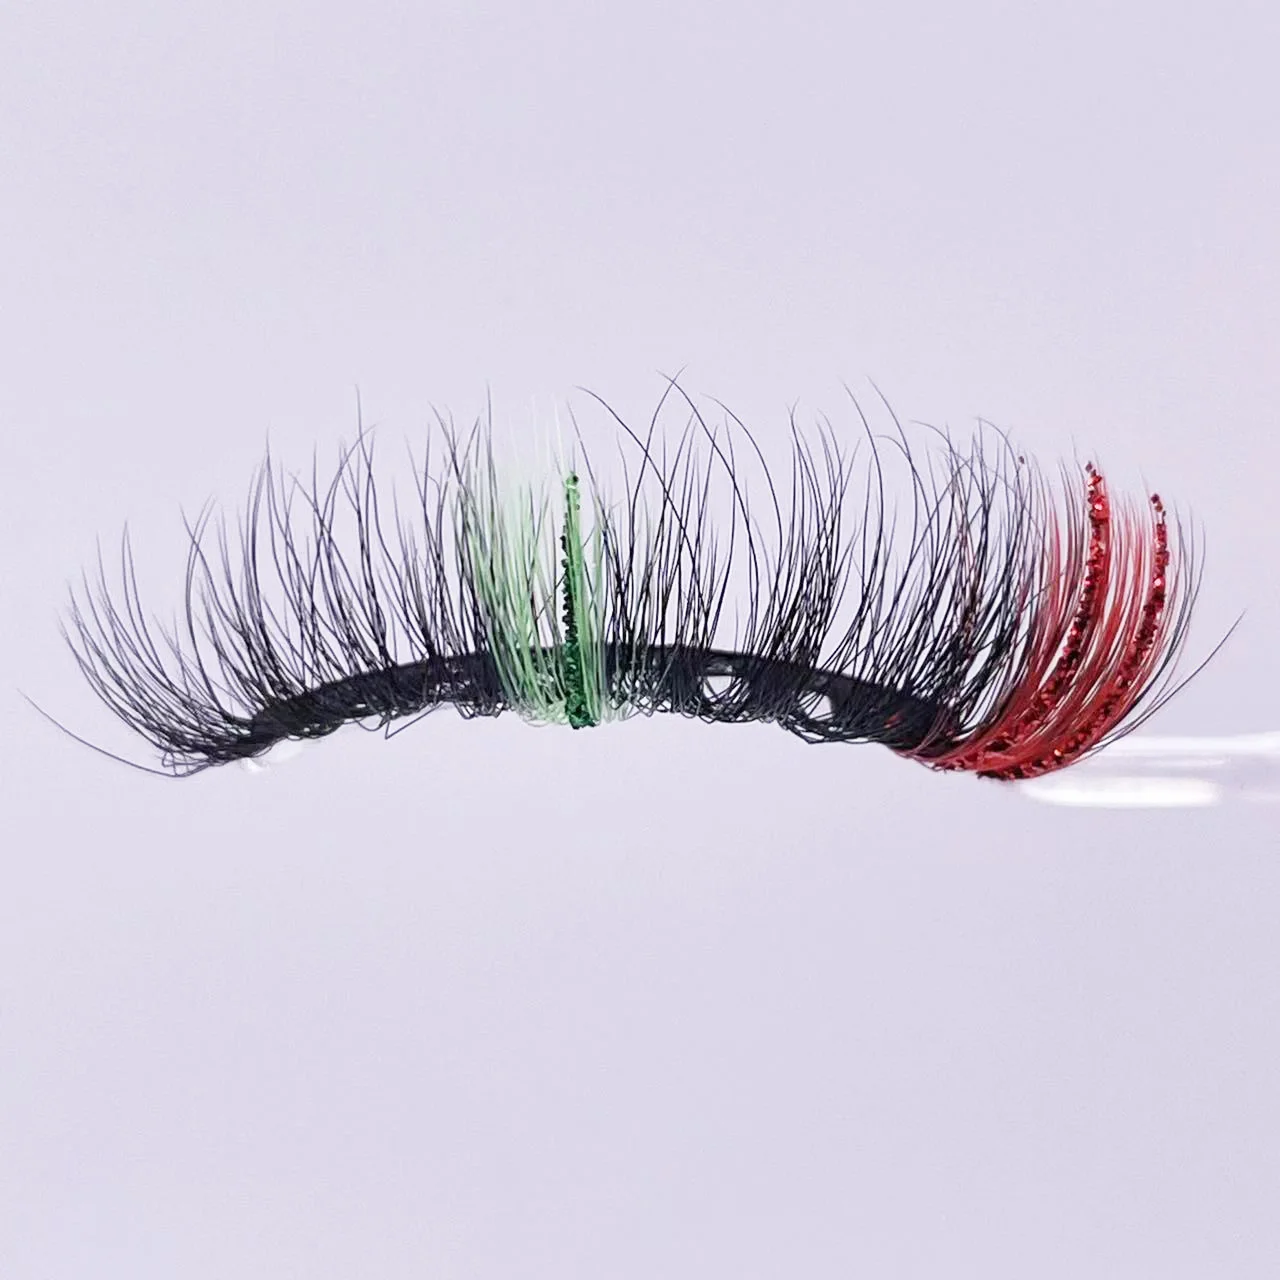 Hbzgtlad Colored Lashes Glitter Mink 15mm -20mm Fluffy Color Streaks Cosplay Makeup Beauty Eyelashes -Outlet Maid Outfit Store S316e79545d7744249be01023d33026aac.jpg